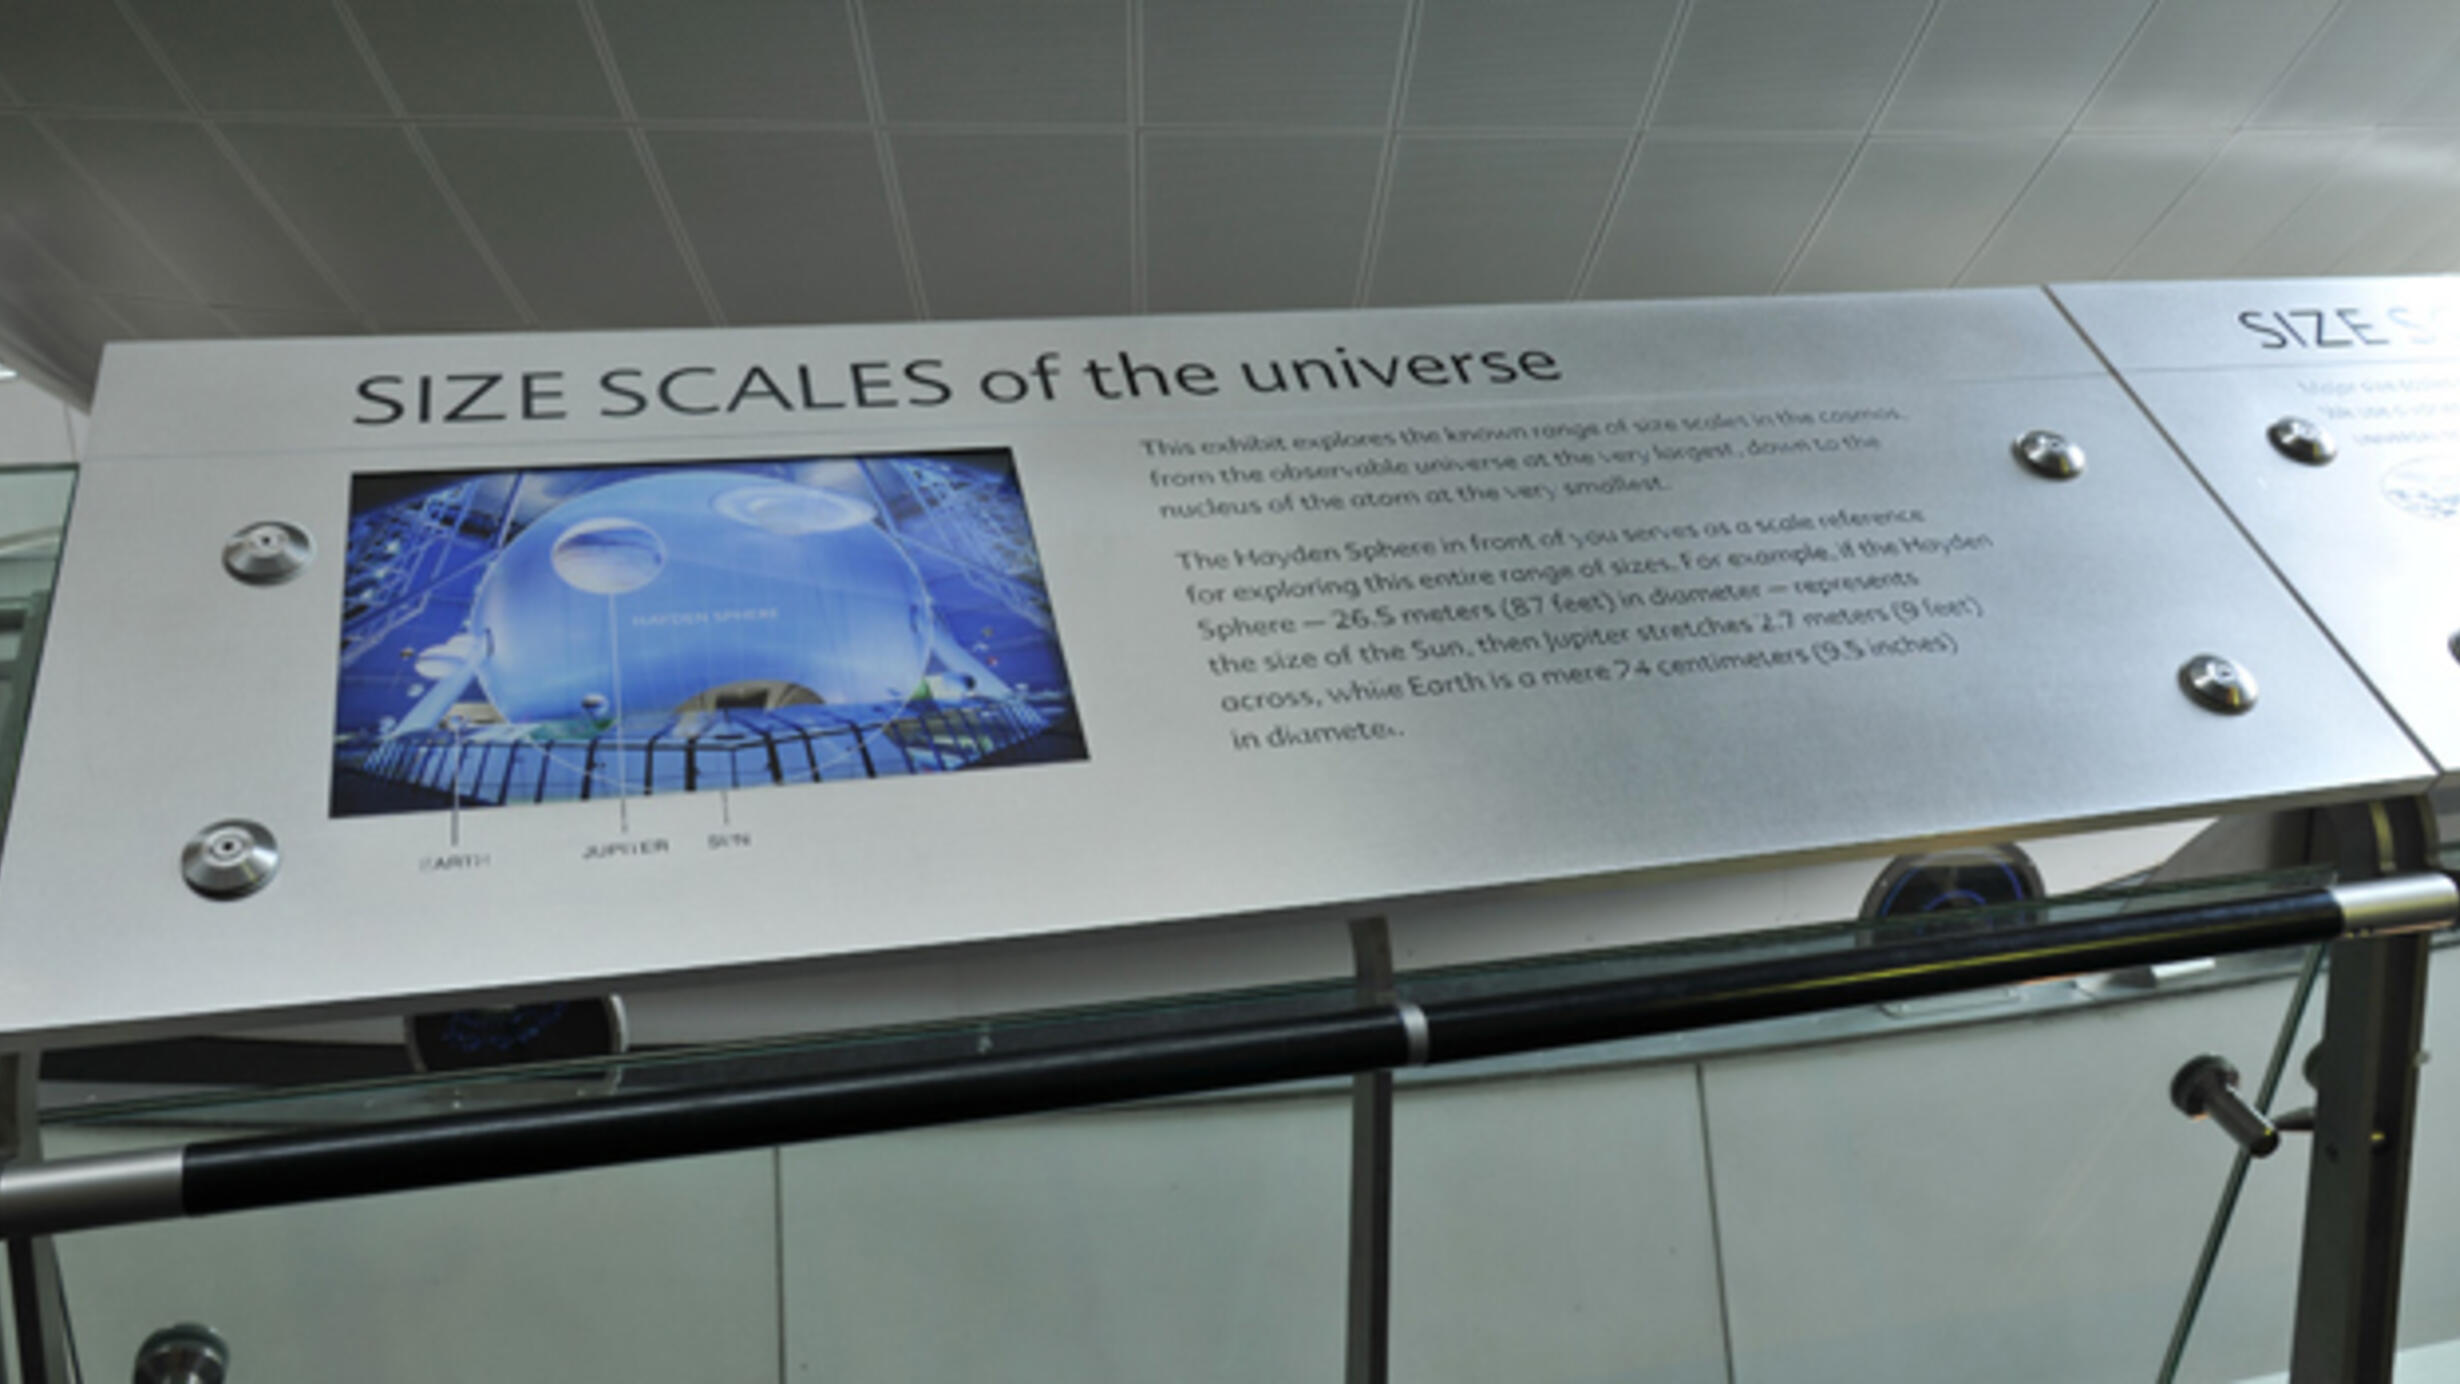 Scales of the universe_HERO